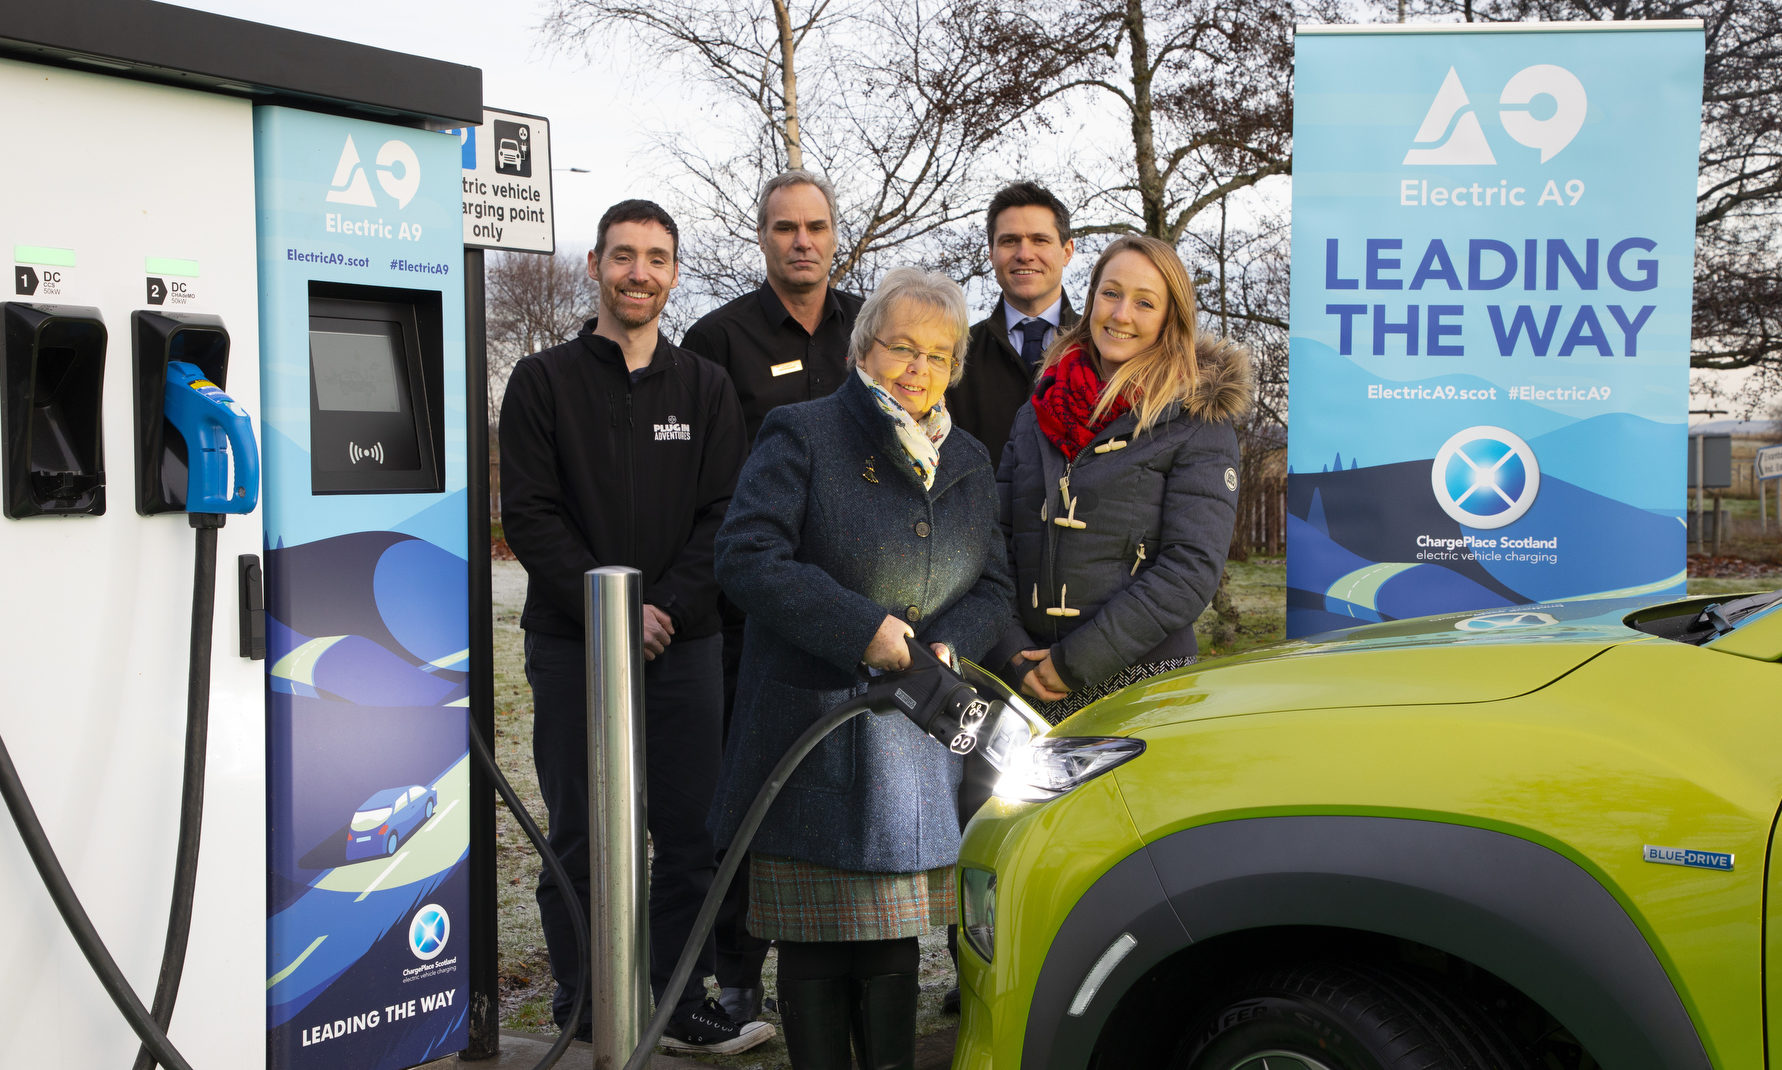 A9 Electric's first vehicle chargepoint goes live in Inverness